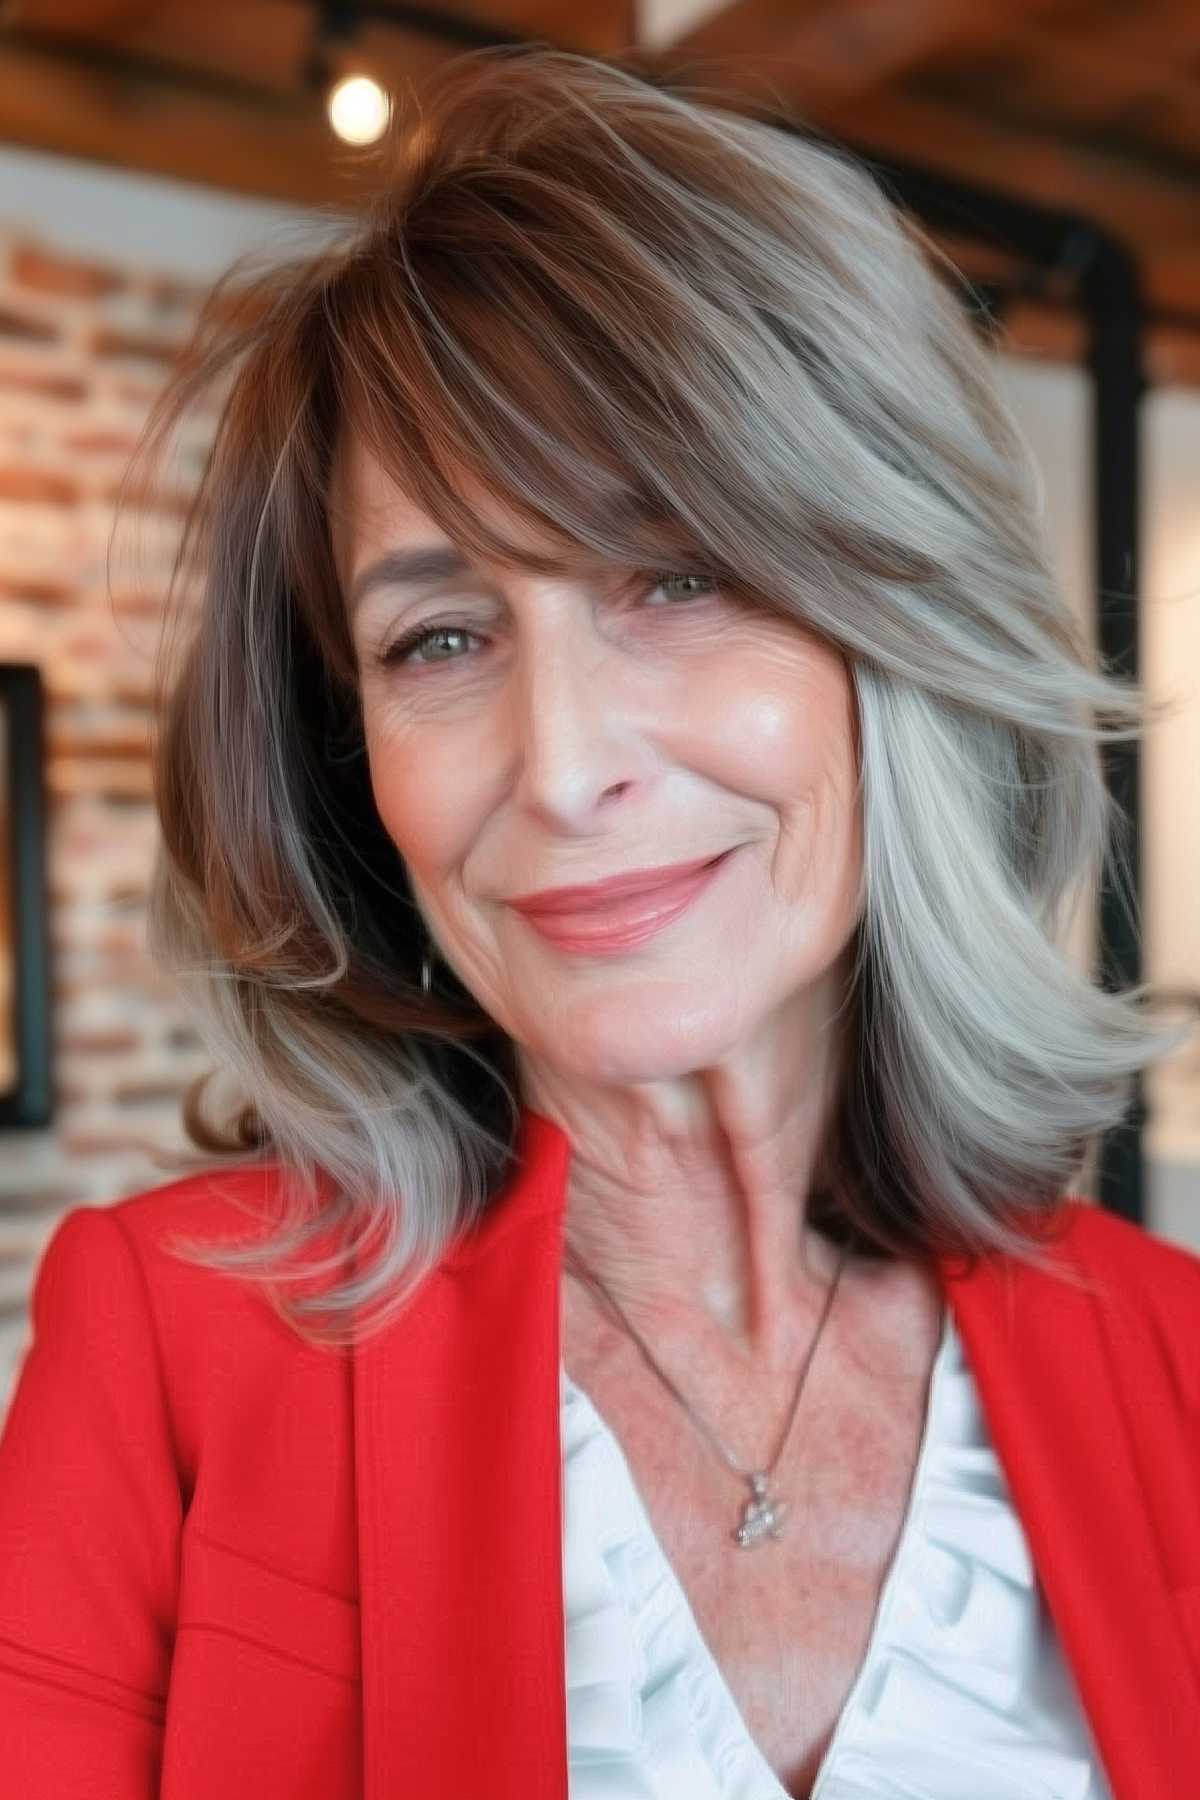 Mature woman with side-swept bangs and layered mid-length hairstyle, wearing a bright red blazer.